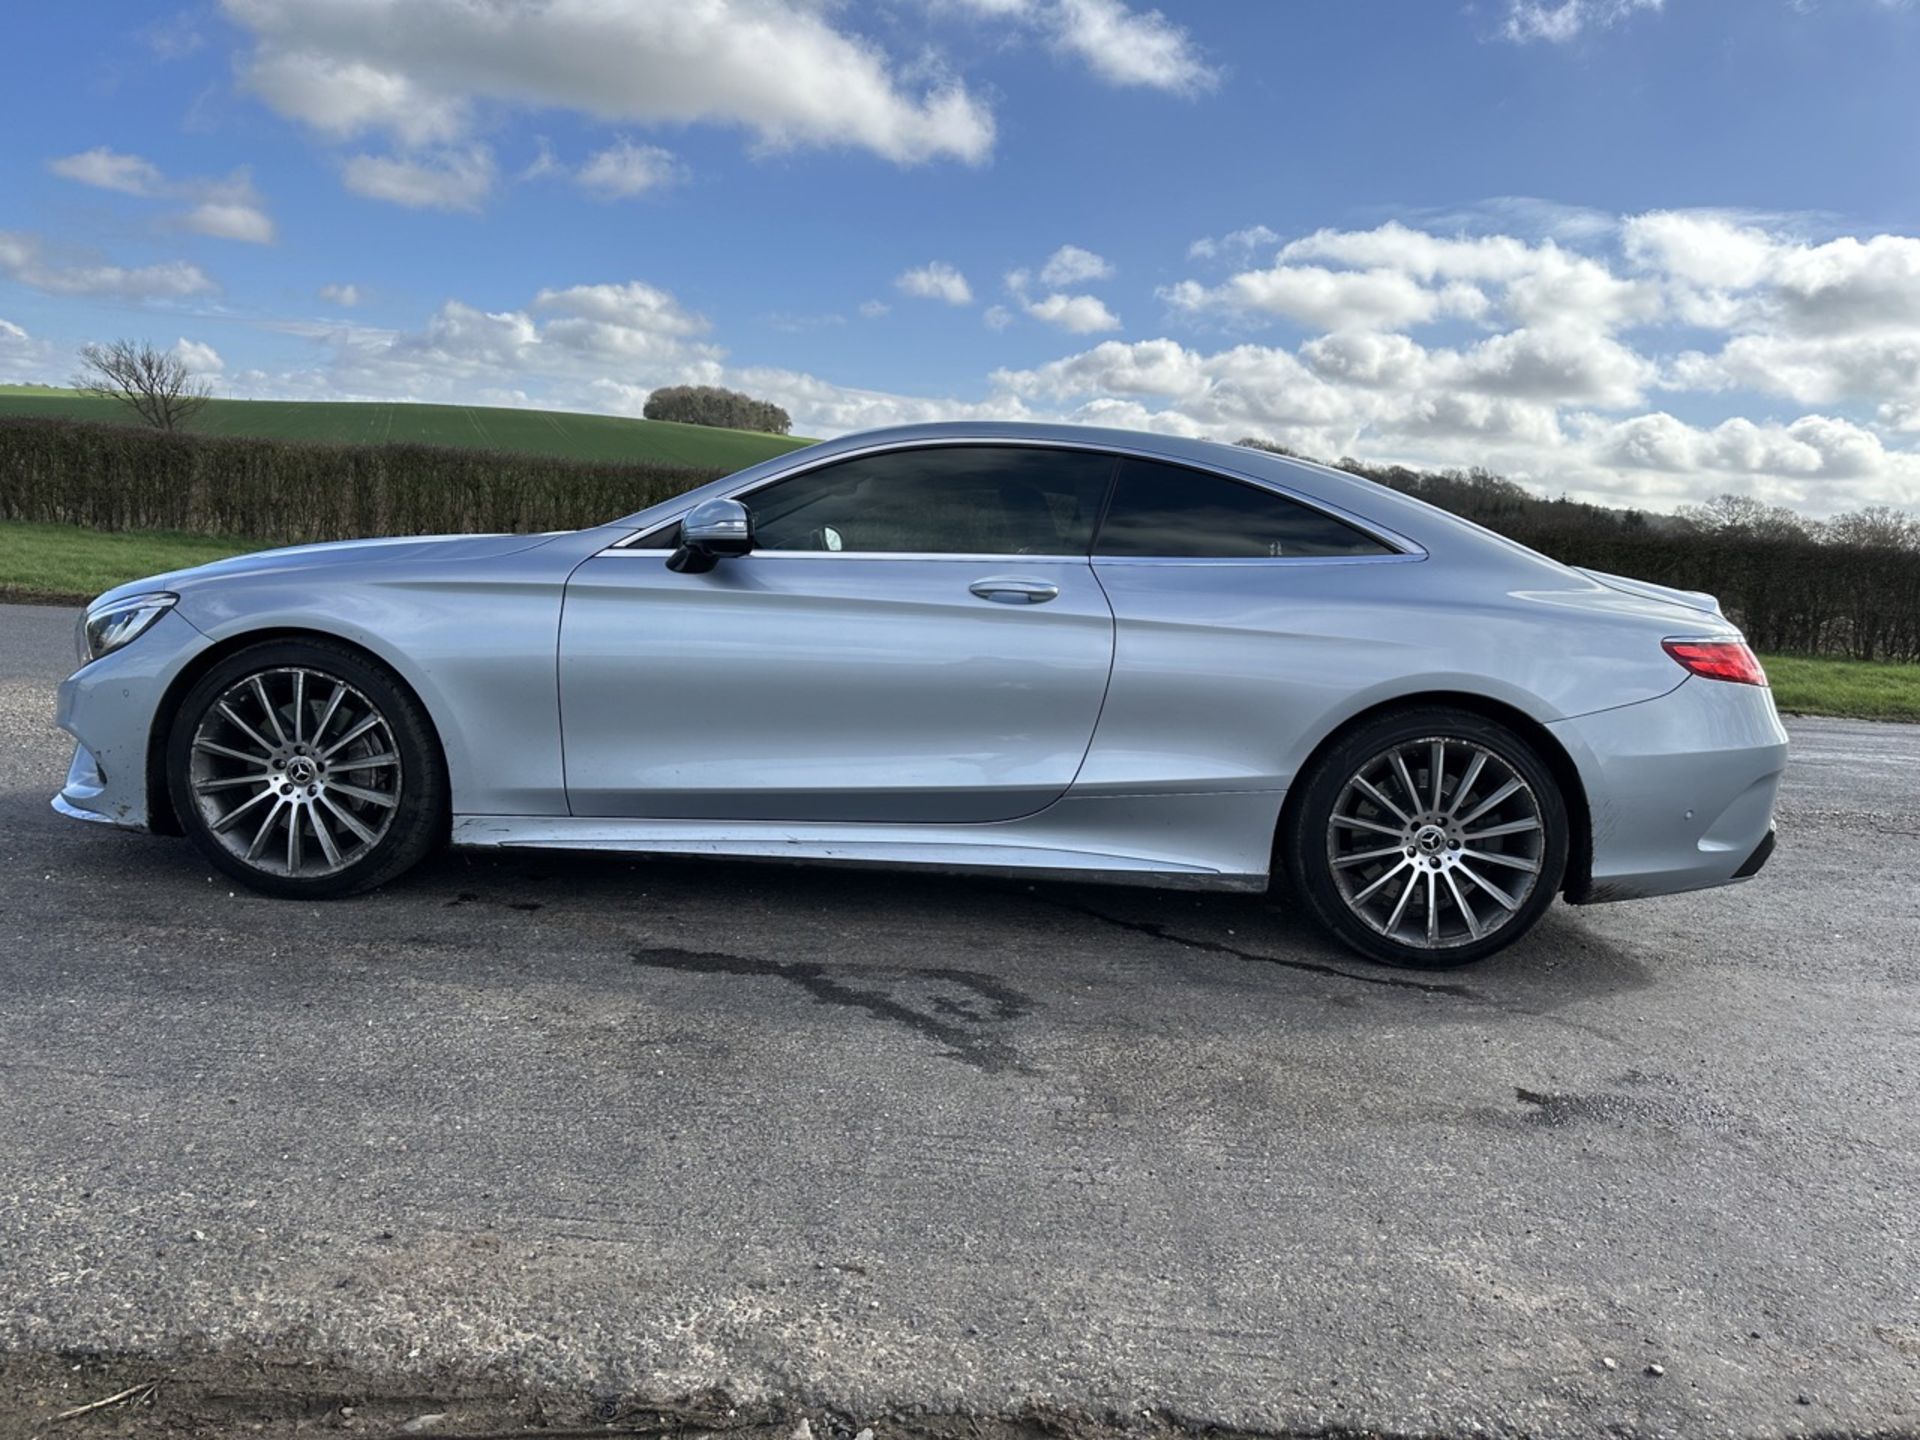 MERCEDES-BENZ S CLASS S500 AMG Line Premium 2dr Auto - Automatic - 2018 - Coupe - 88K miles Full SH - Image 10 of 30